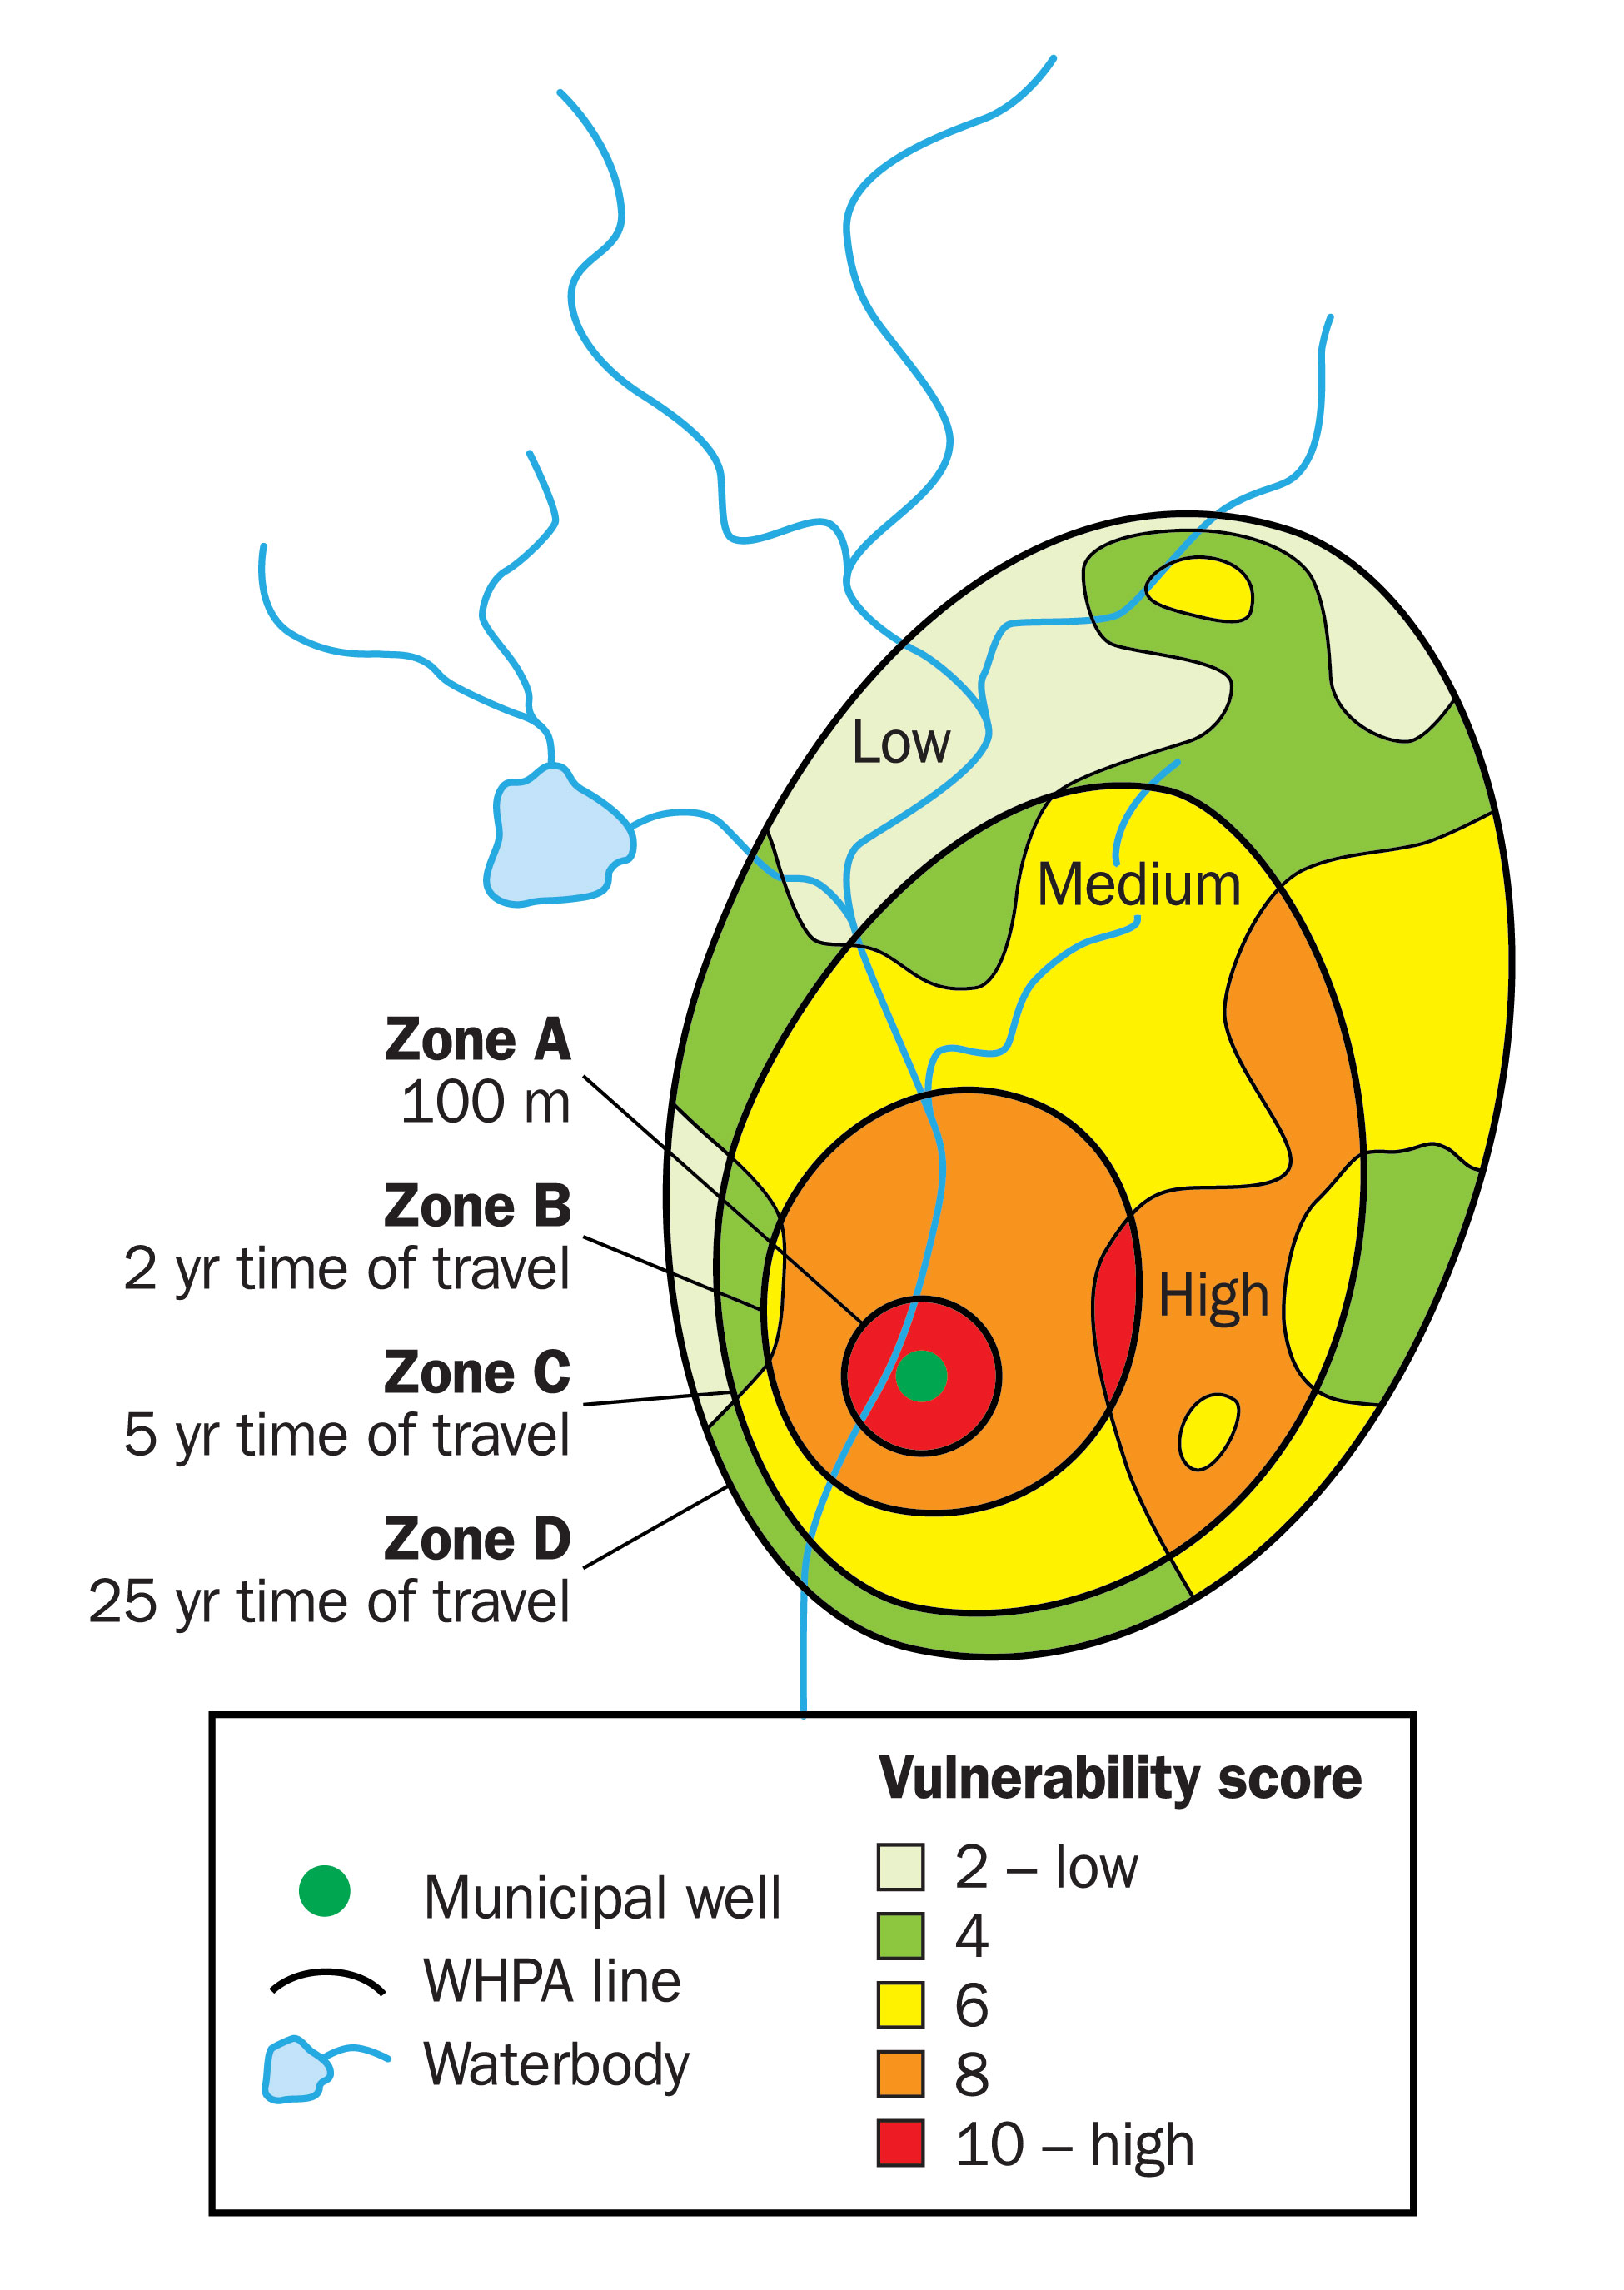 Wellhead protection areas are divided into areas based on intrinsic vulnerability.